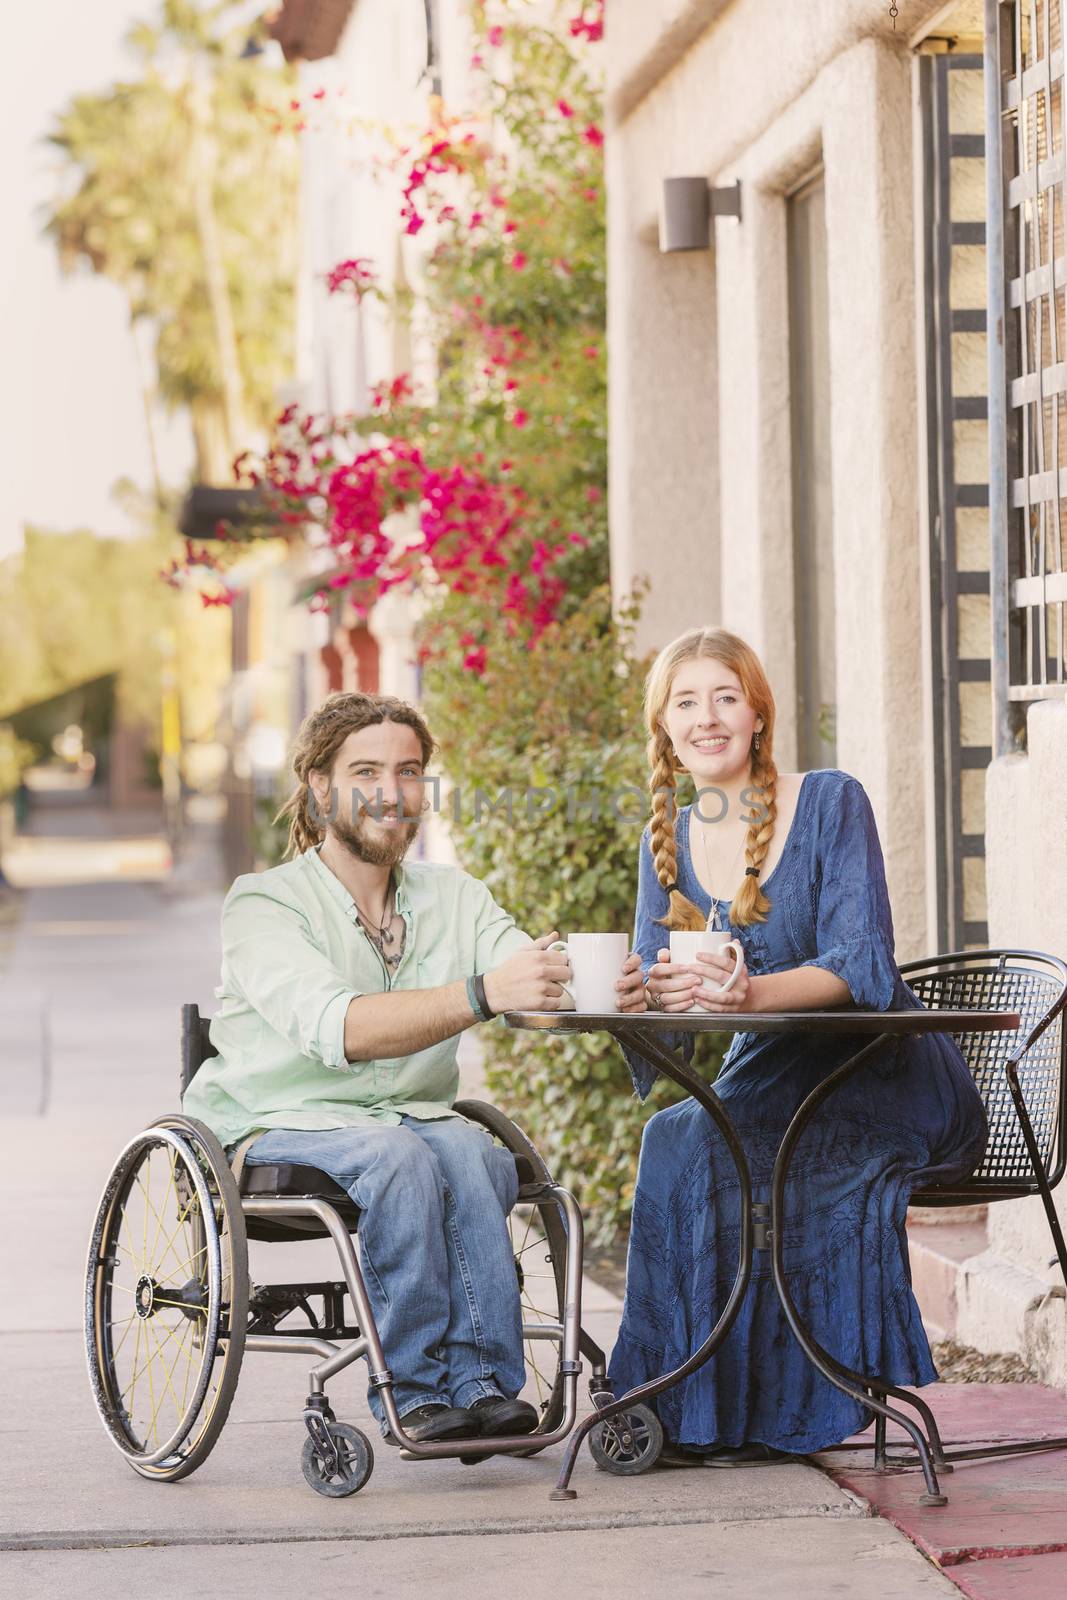 Smiling Woman with Man in Wheelchair Outdoors by Creatista